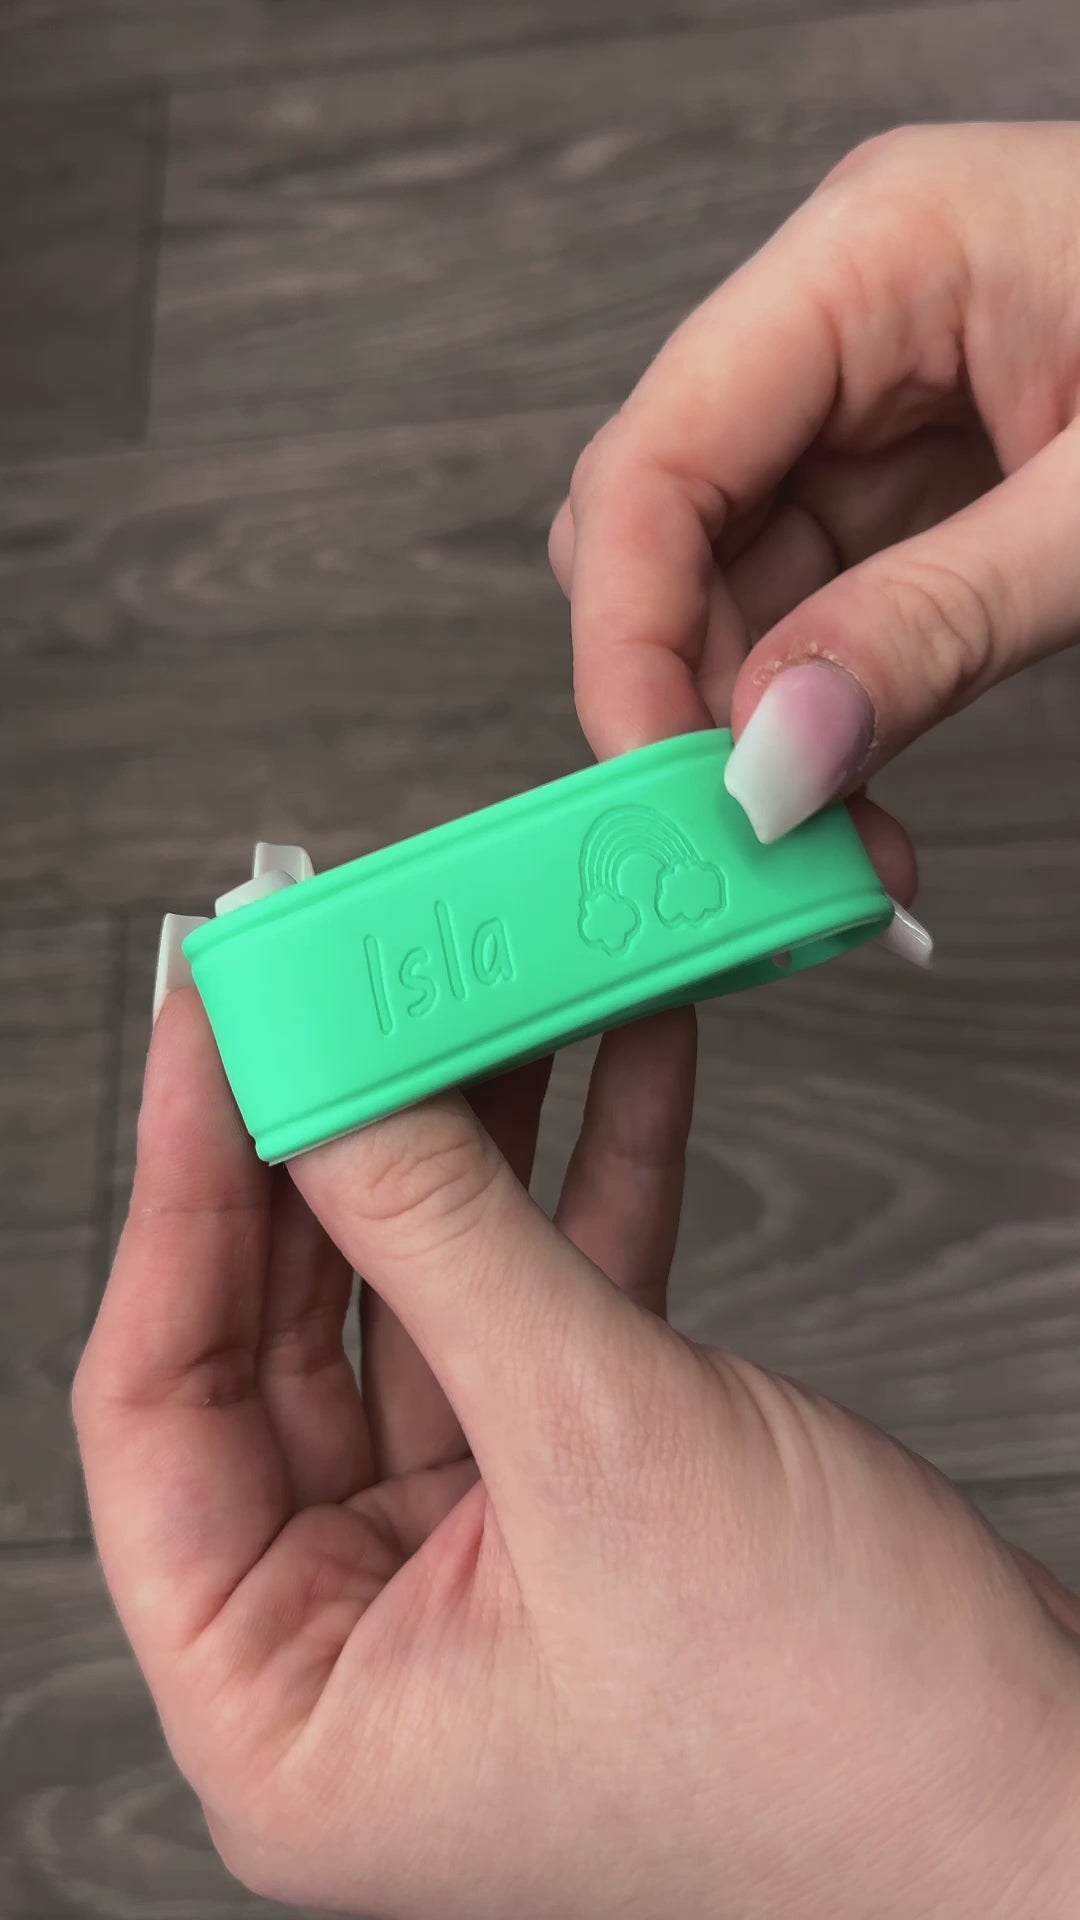 Showing a silicone bottle band being used, and stretched, Explaining details about the laser marked bottle band